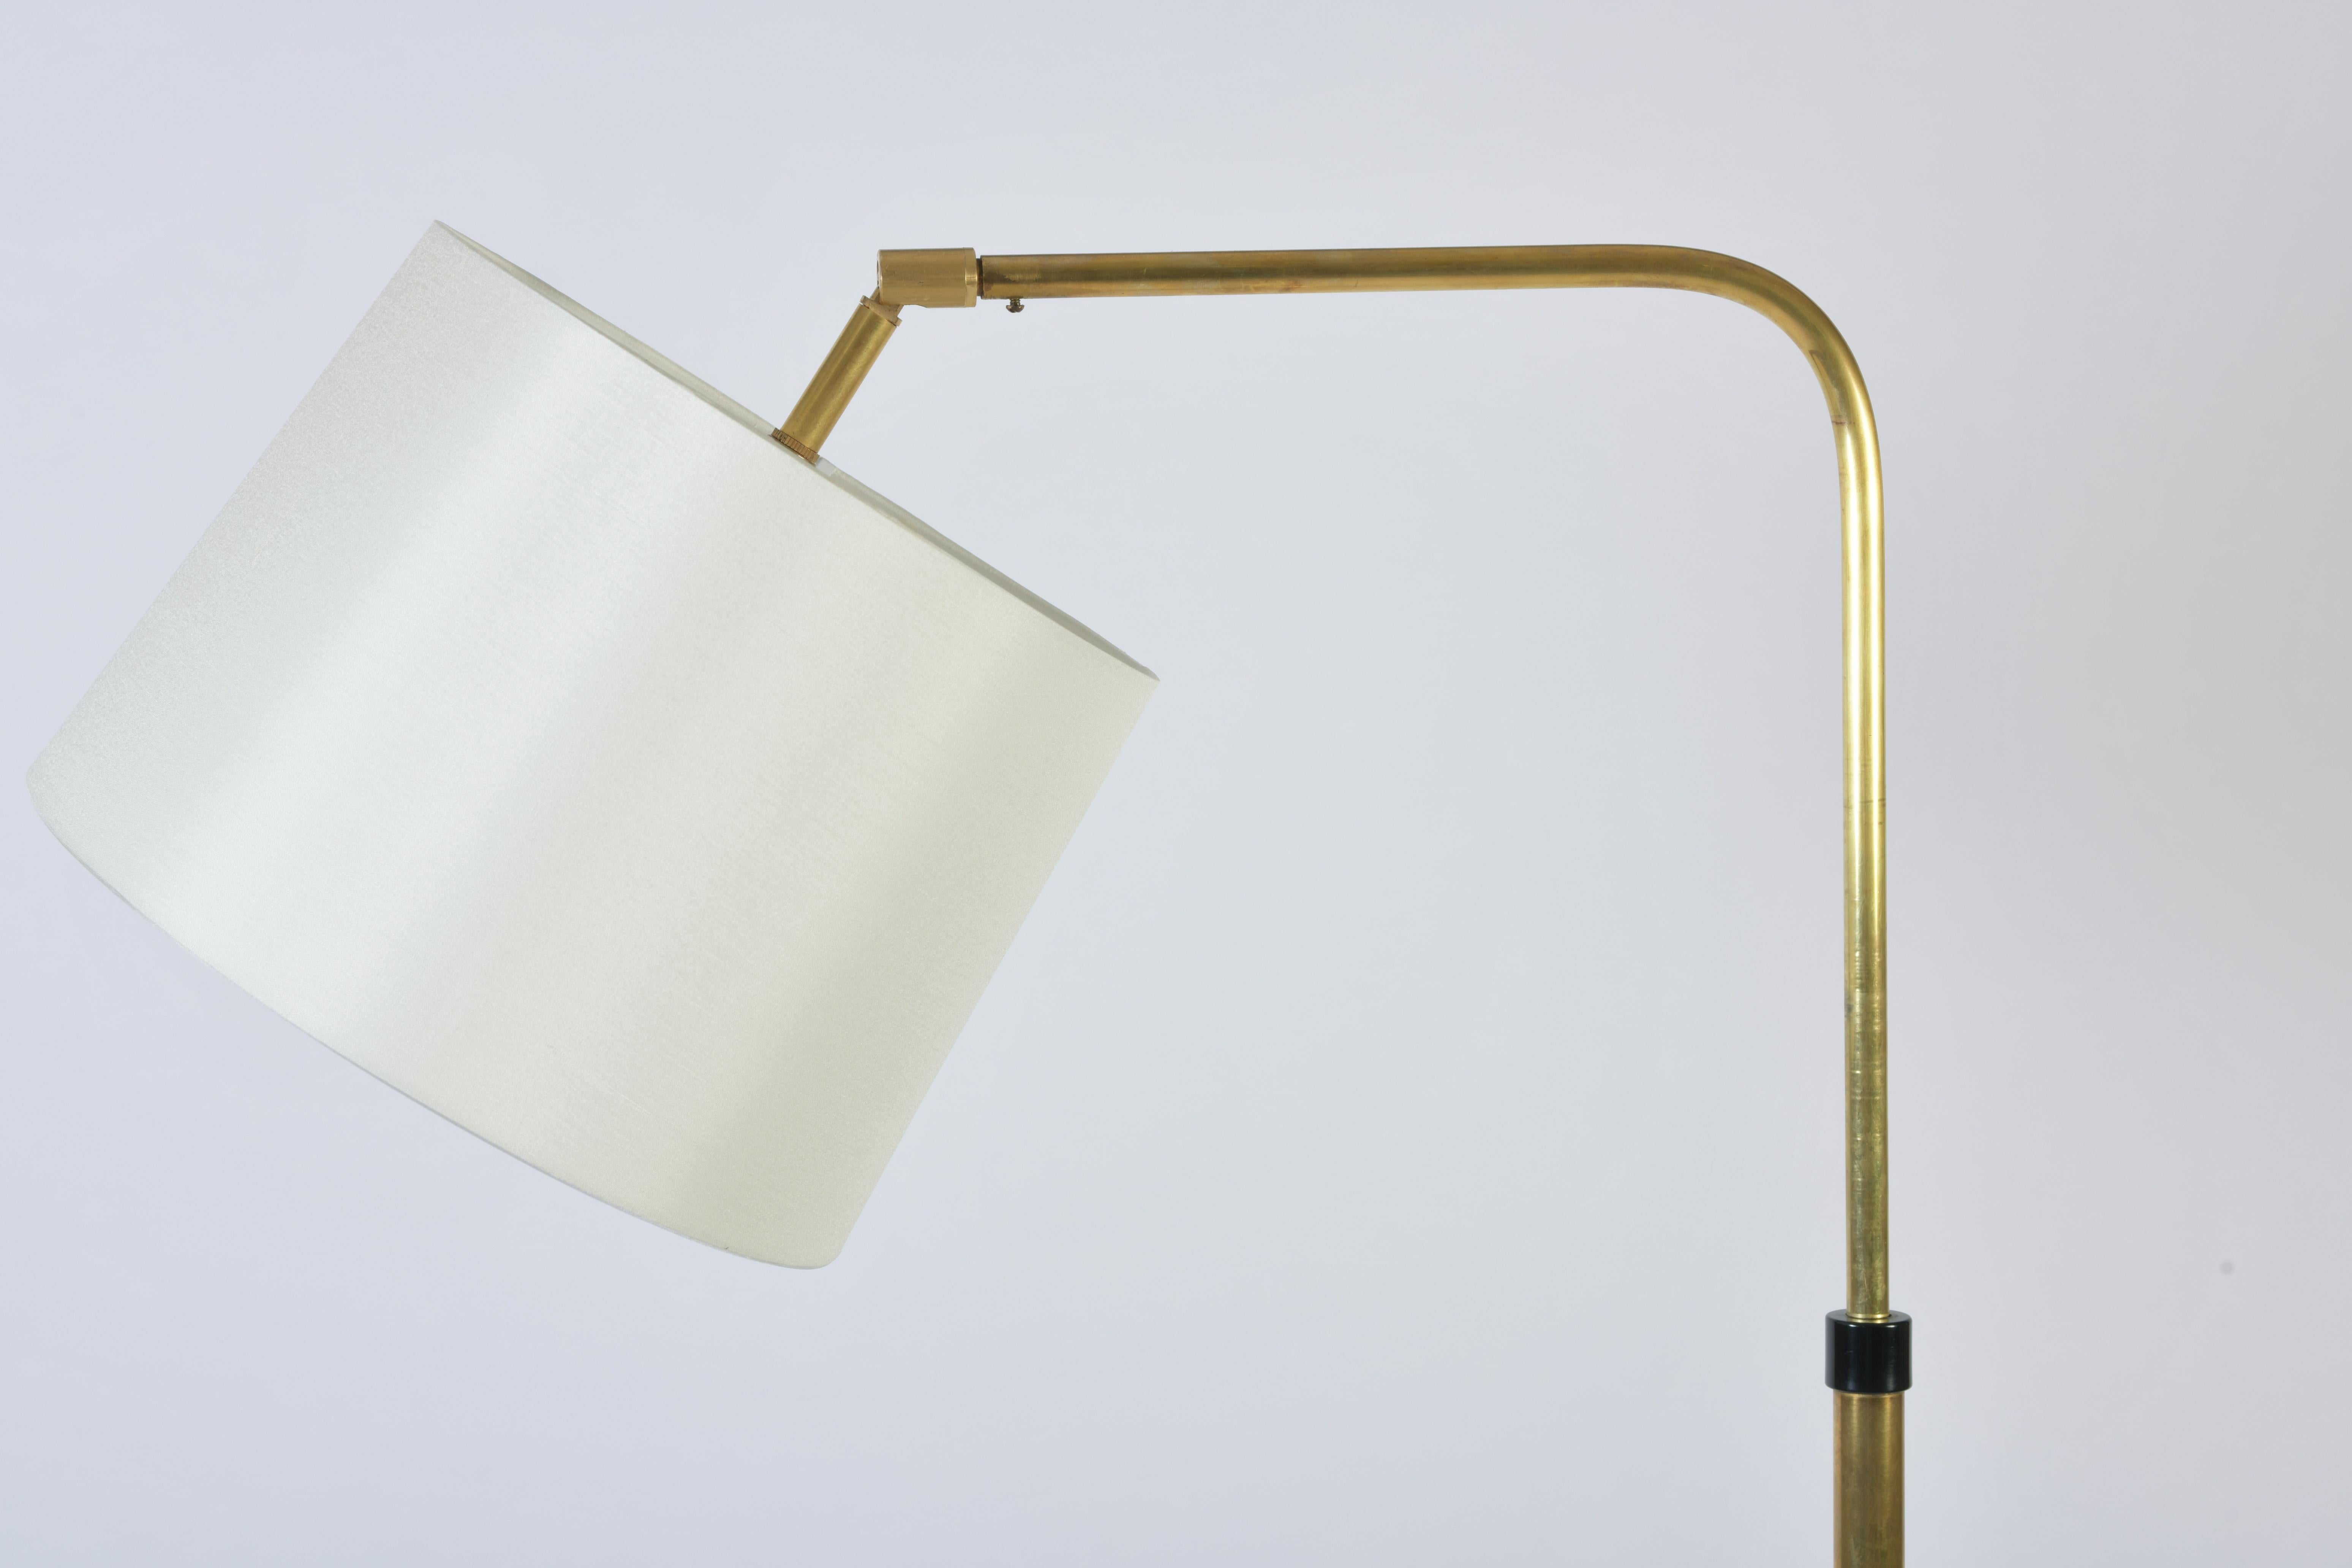 A telescopic brass floor lamp, with an adjustable light, in an ivory fabric drum shade
France, circa 1970.